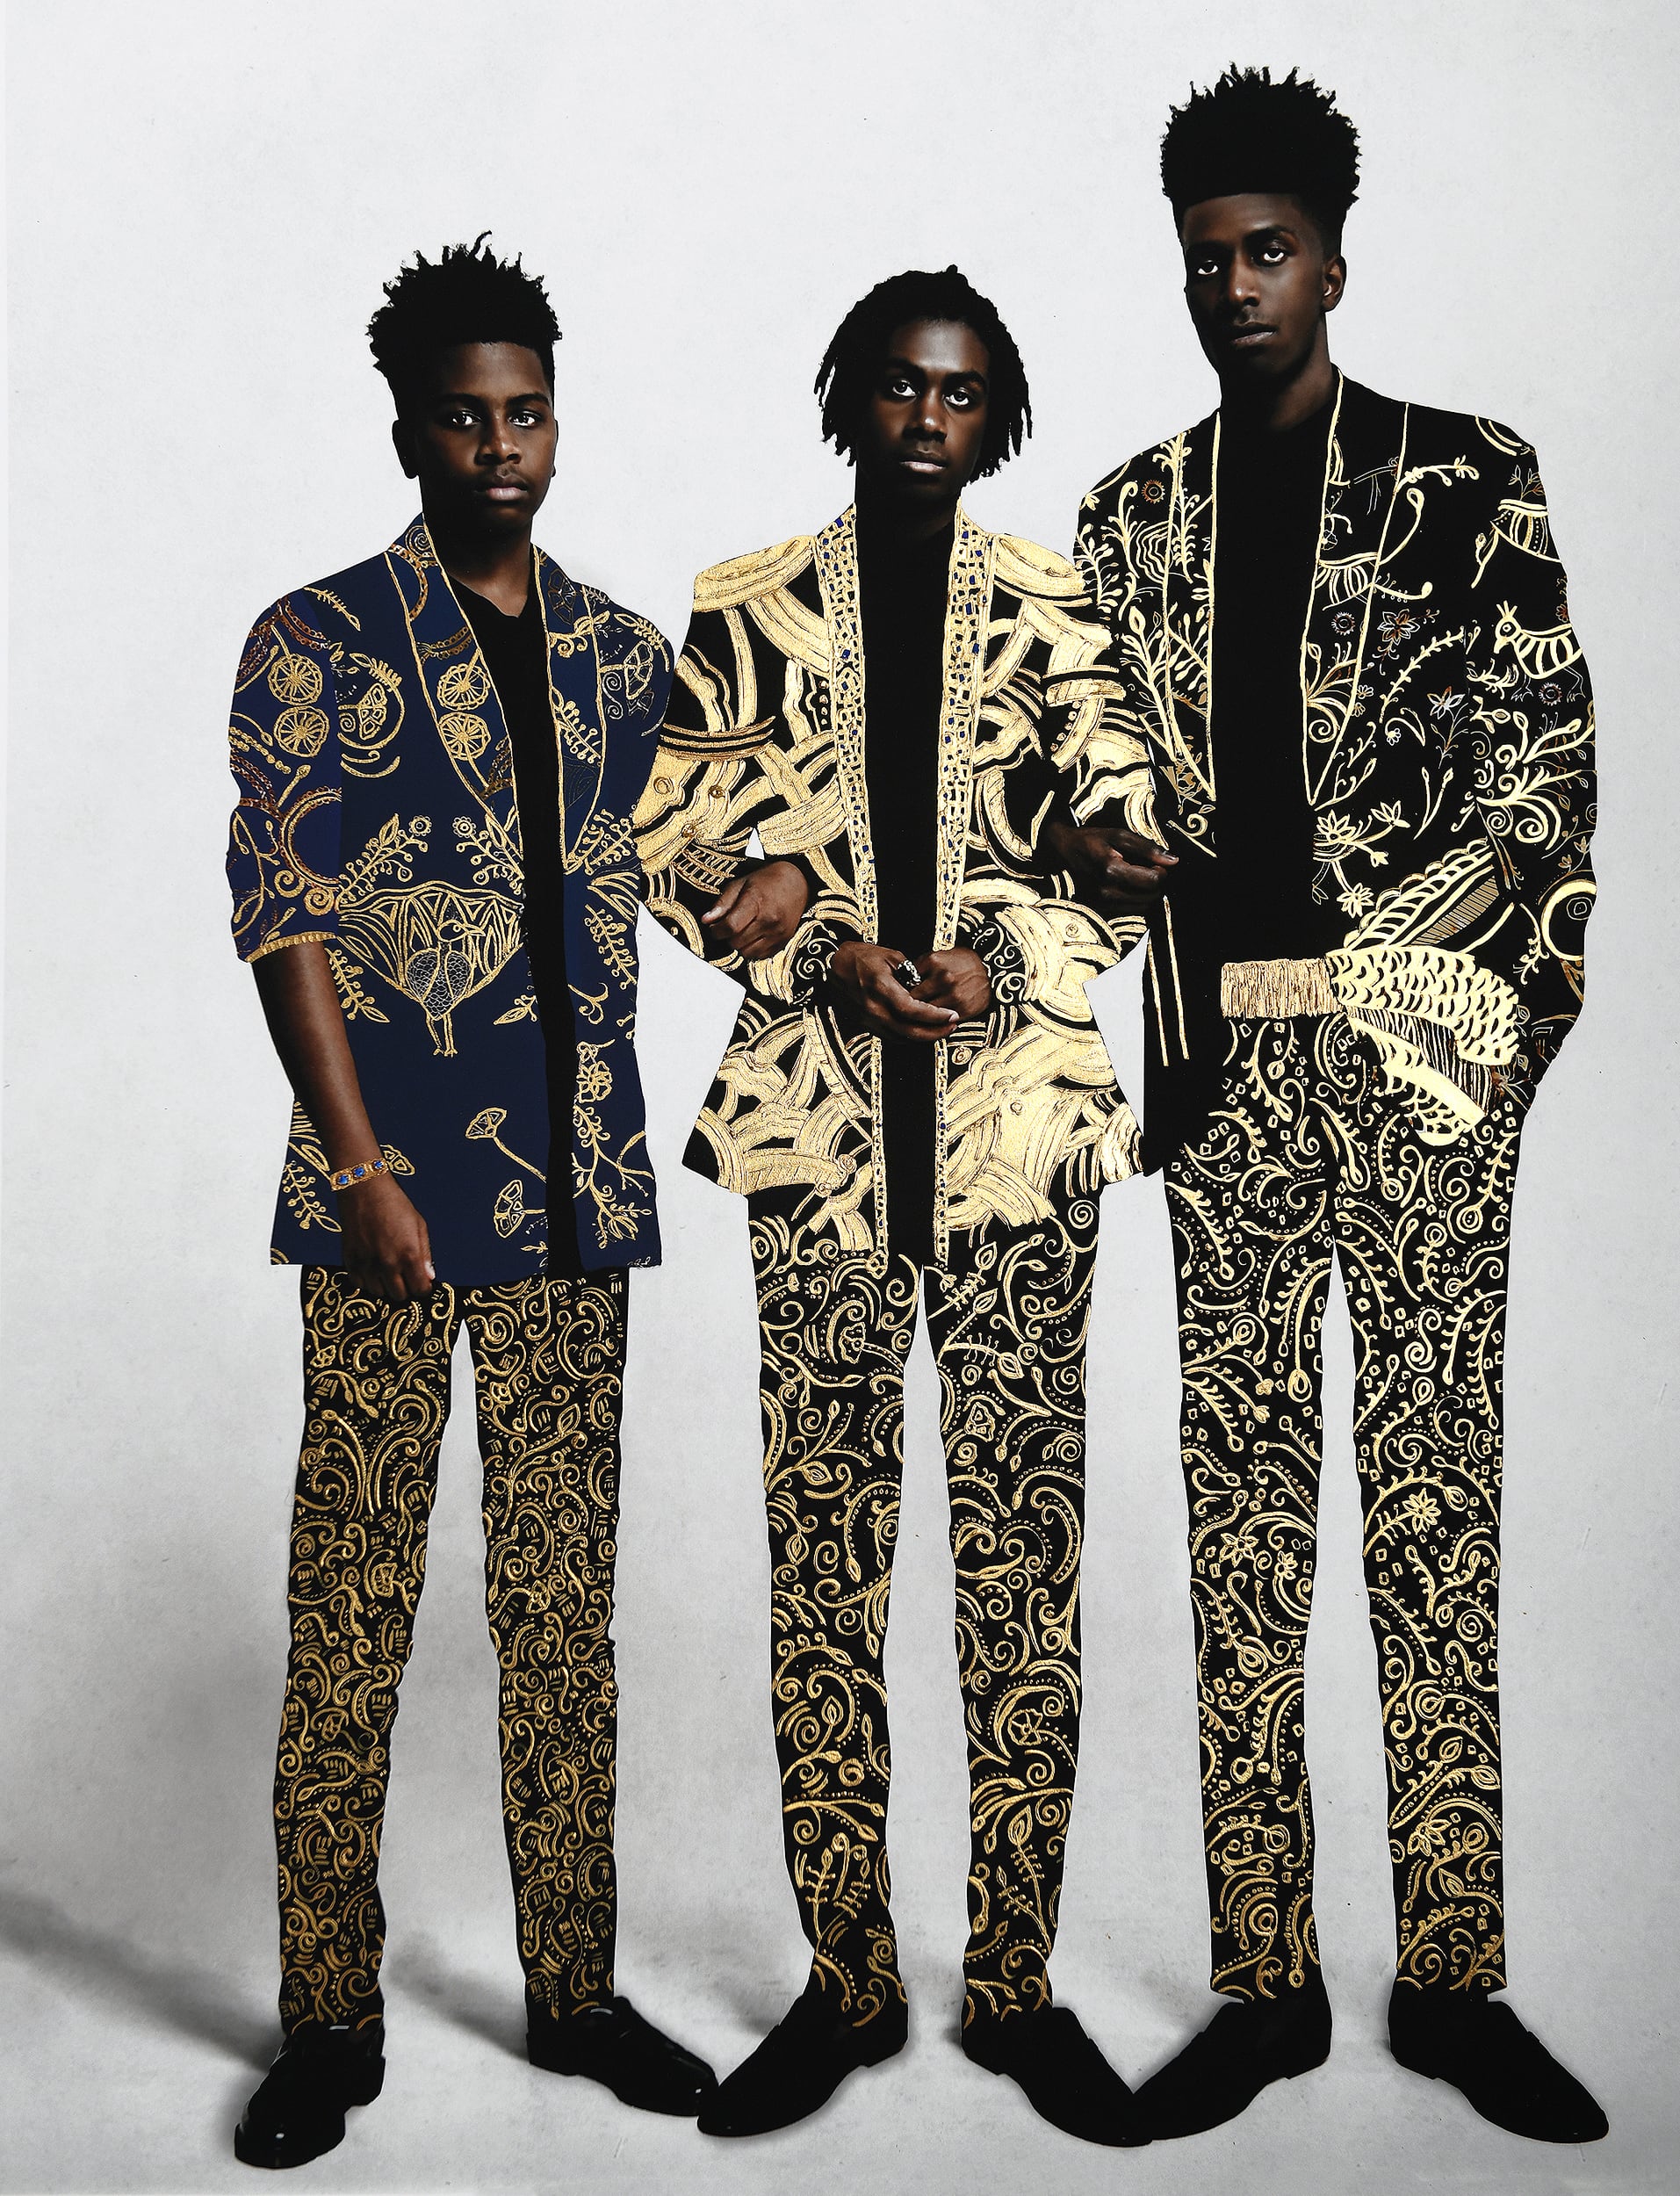 Three men wearing suits gilded with ornate patterns stand in a group